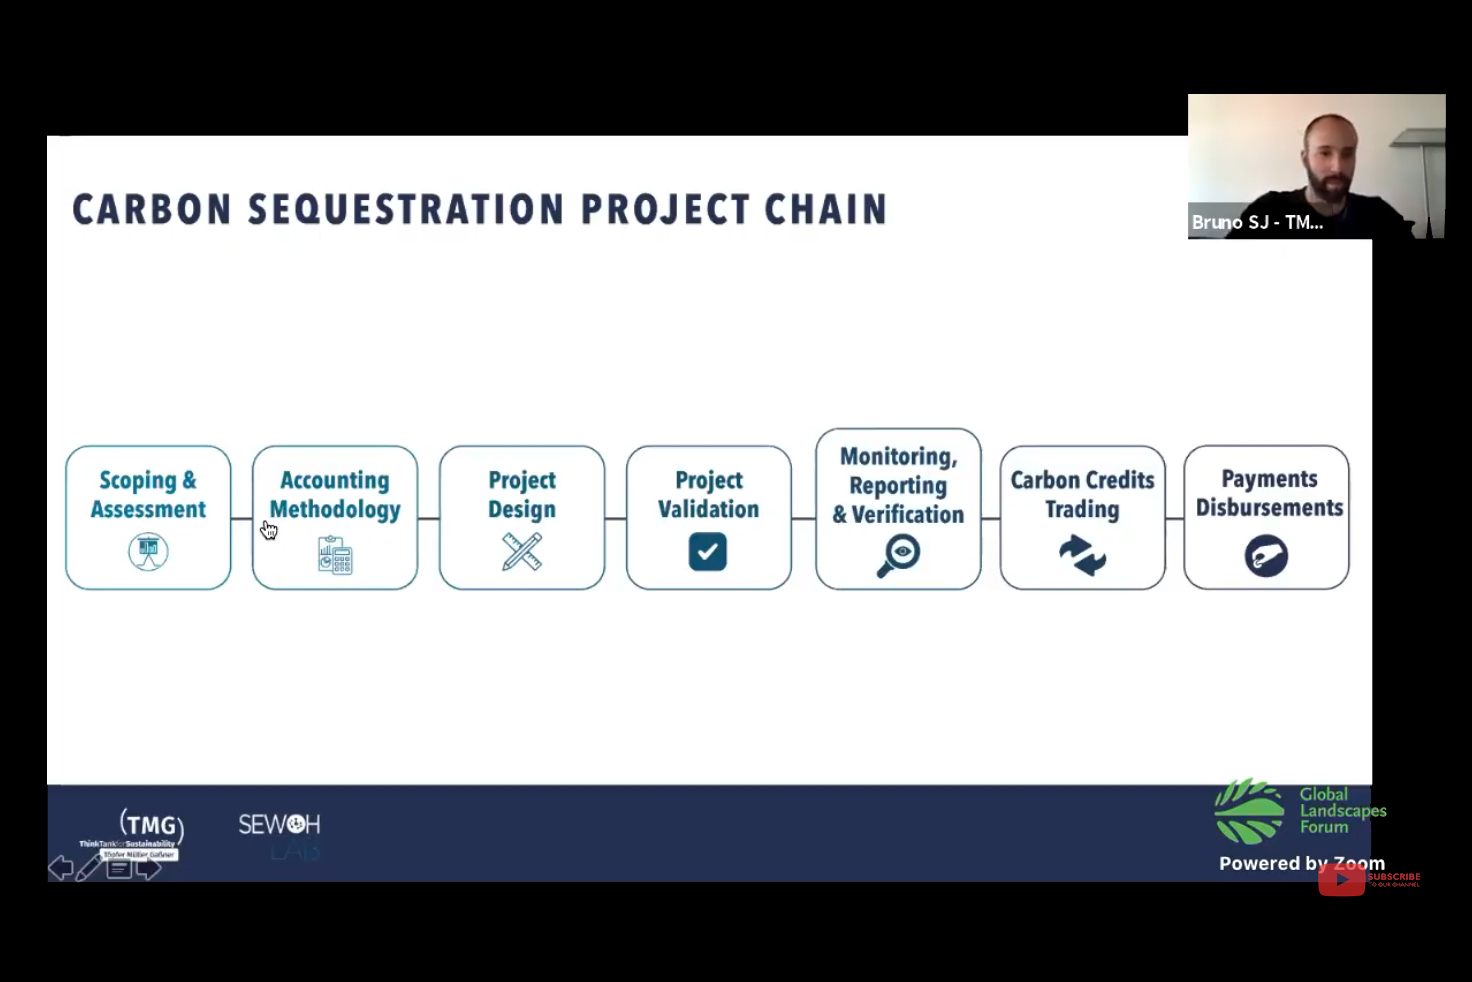 The Carbon Sequestration Project Chain